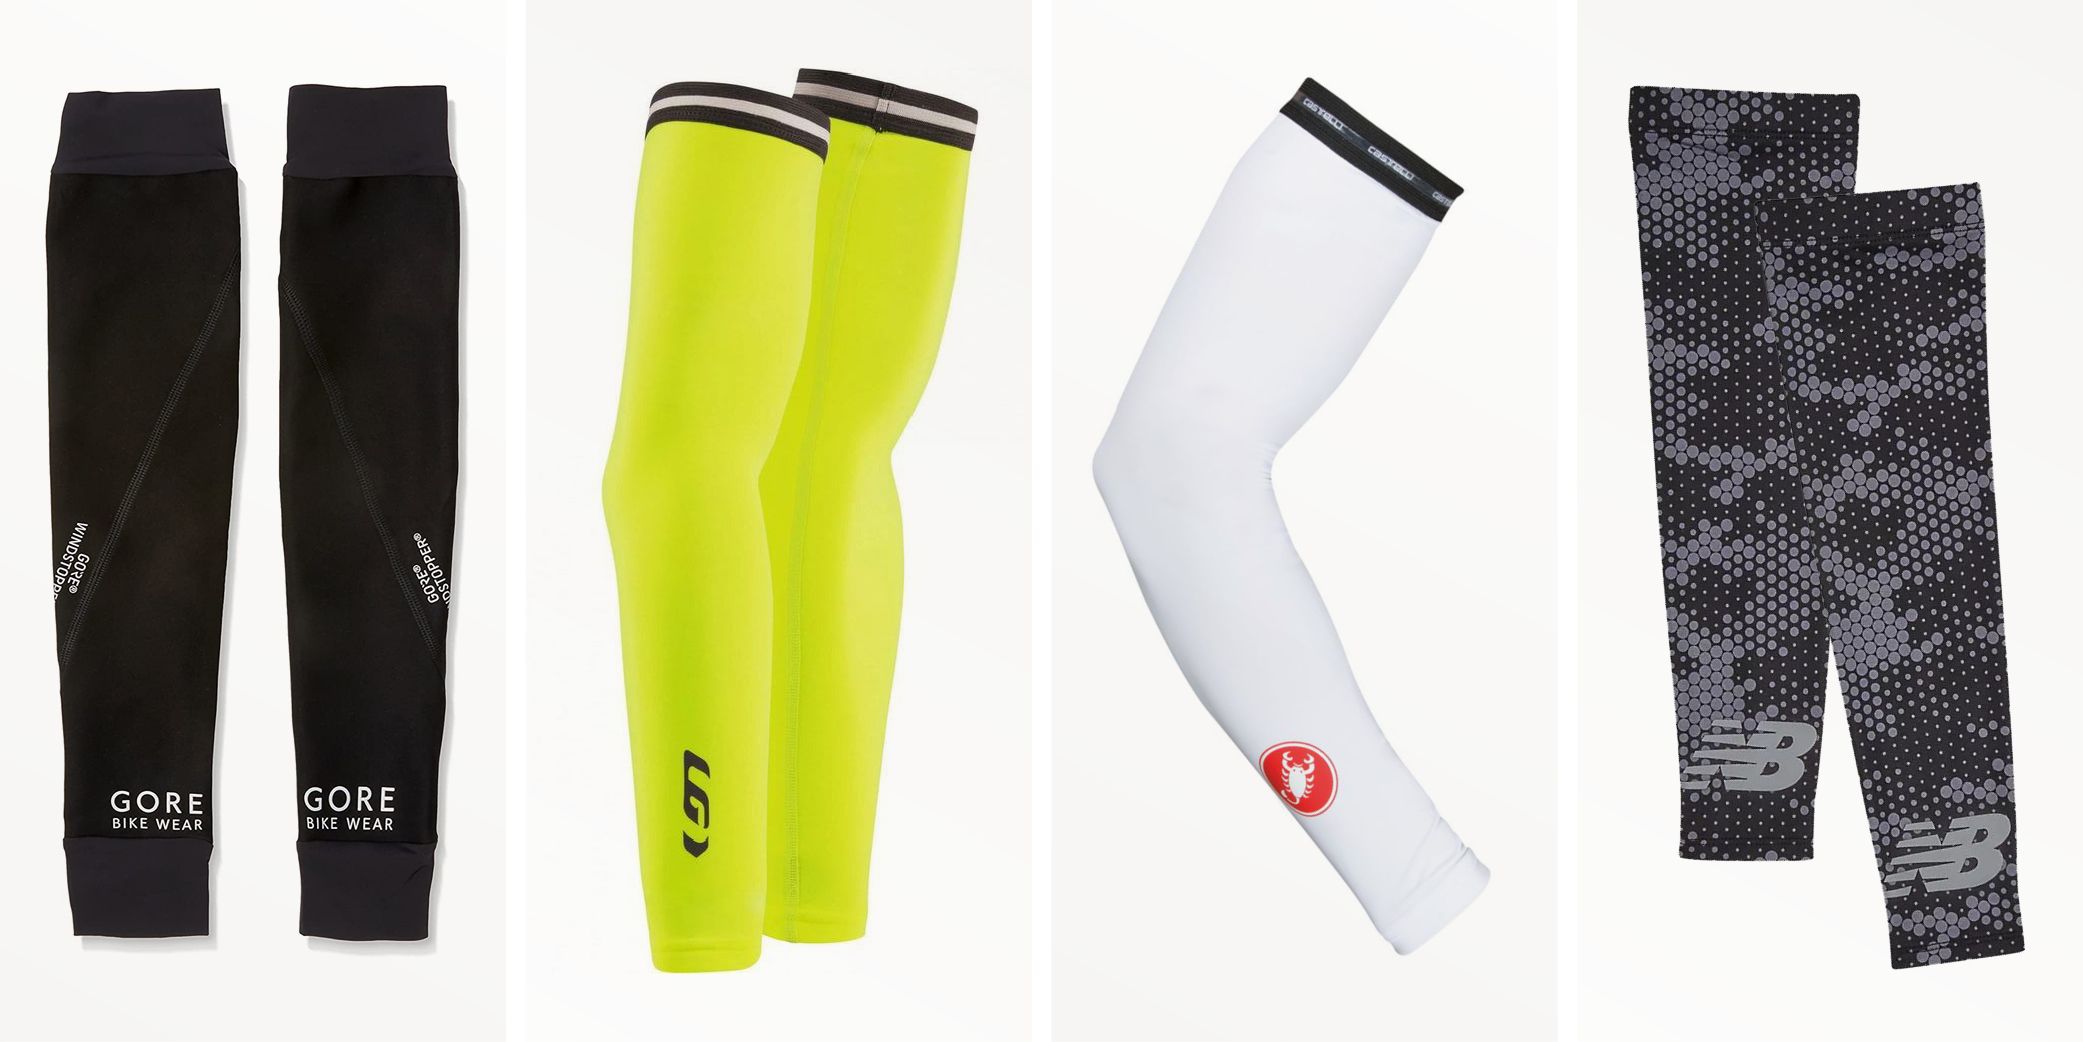 3 Pairs ZQG Protects From UV Rays Color : Black, Size : Straight cylinder Sun & Scratches Boosts Circulation & Helps Recovery After Exercise Cycling Arm Warmers Arm Compression Sleeves 